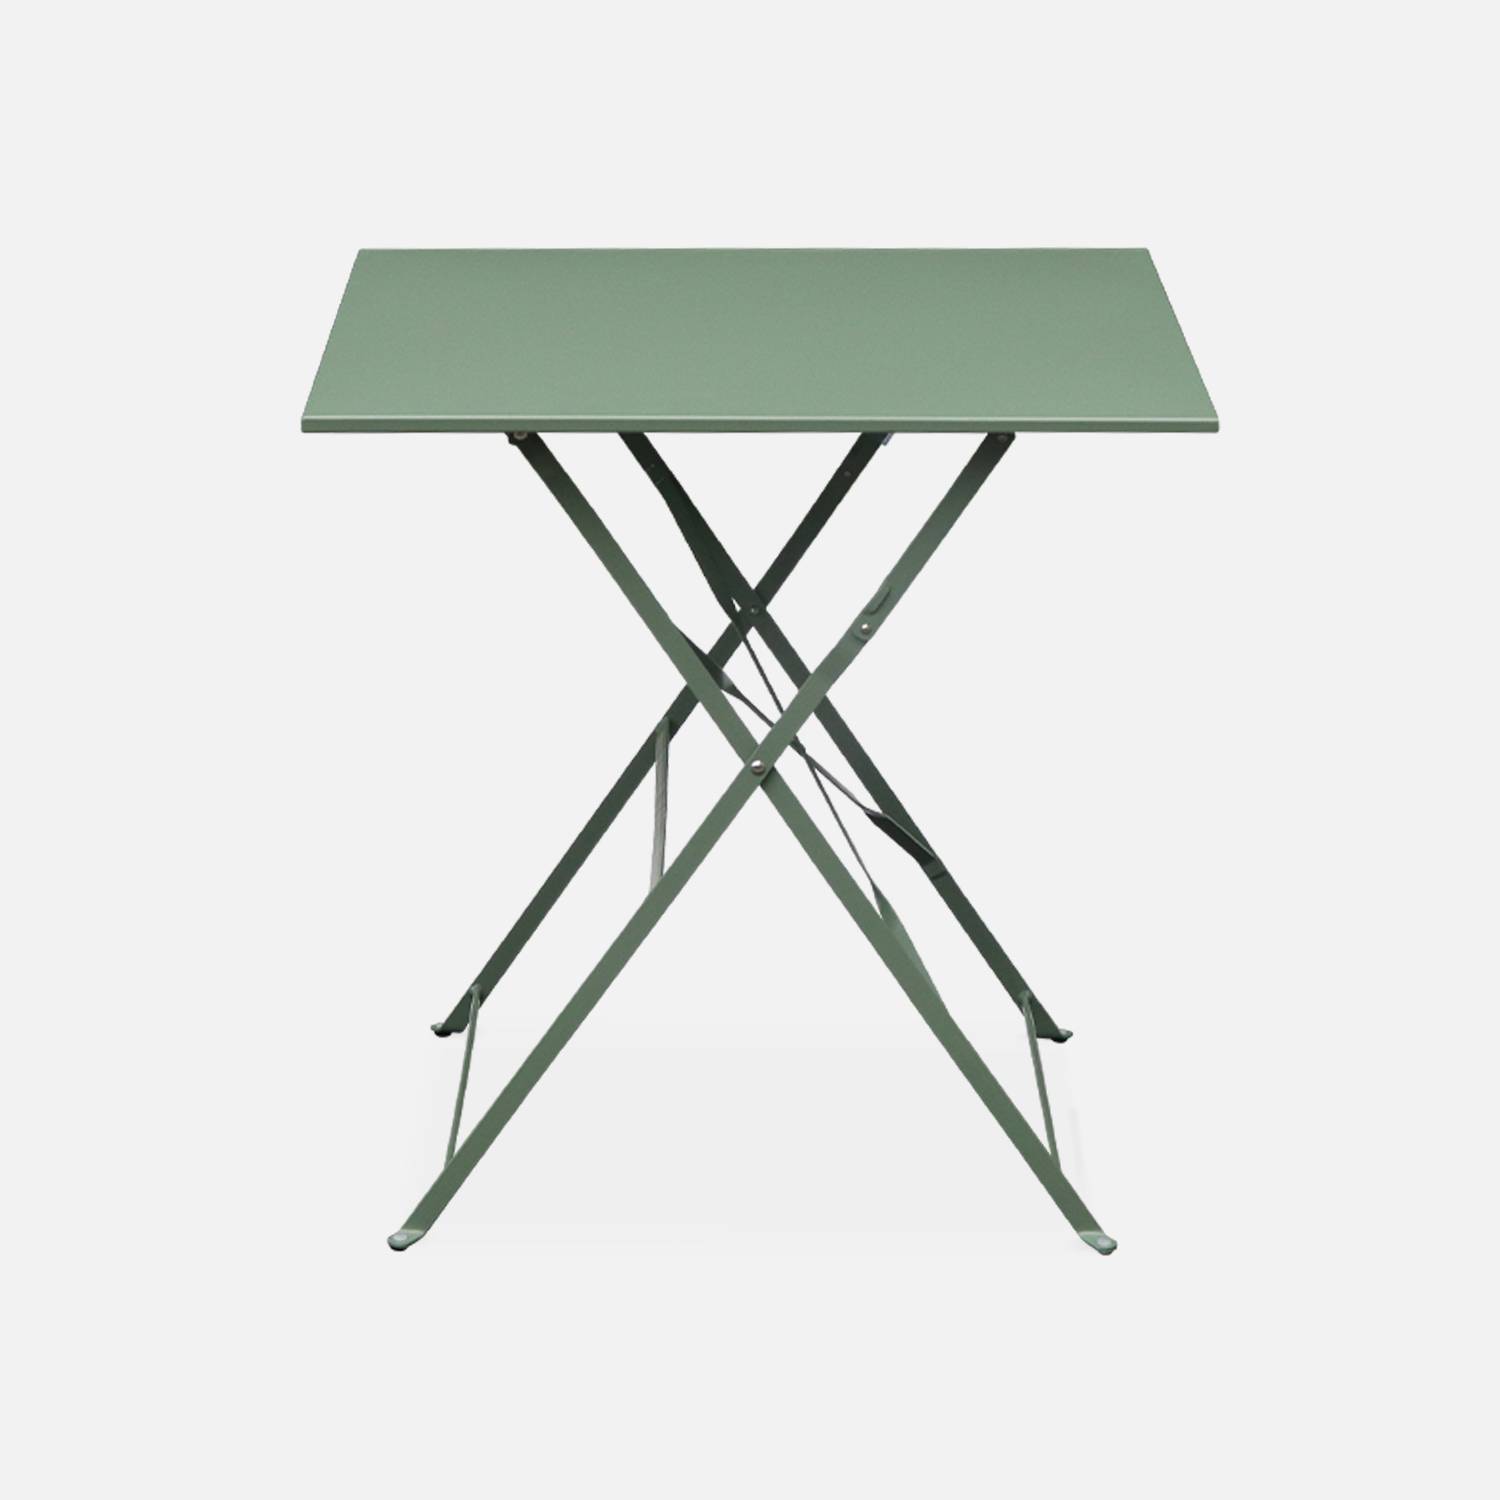 2-seater foldable thermo-lacquered steel bistro garden table with chairs, 70x70cm - Emilia - Sage geen,sweeek,Photo3